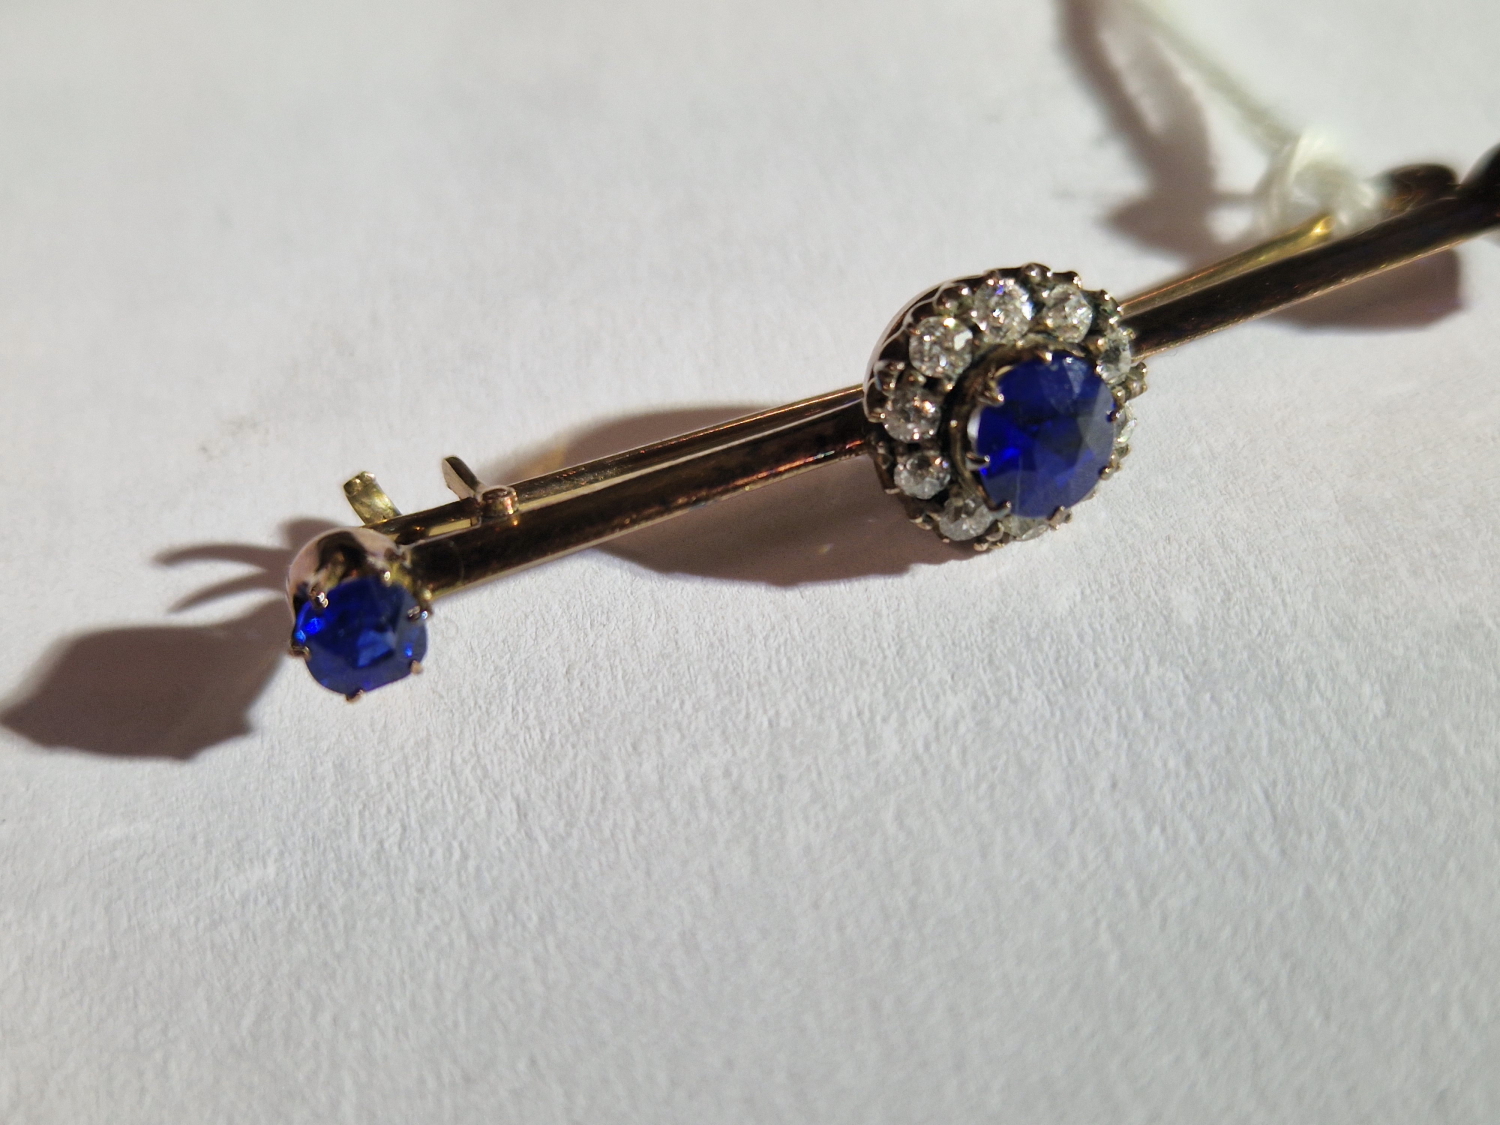 AN ANTIQUE SAPPHIRE AND DIAMOND BRA BROOCH. UNHALLMARKED, ASSESSED AS 9ct GOLD. LENGTH 4.6cms. - Image 4 of 7